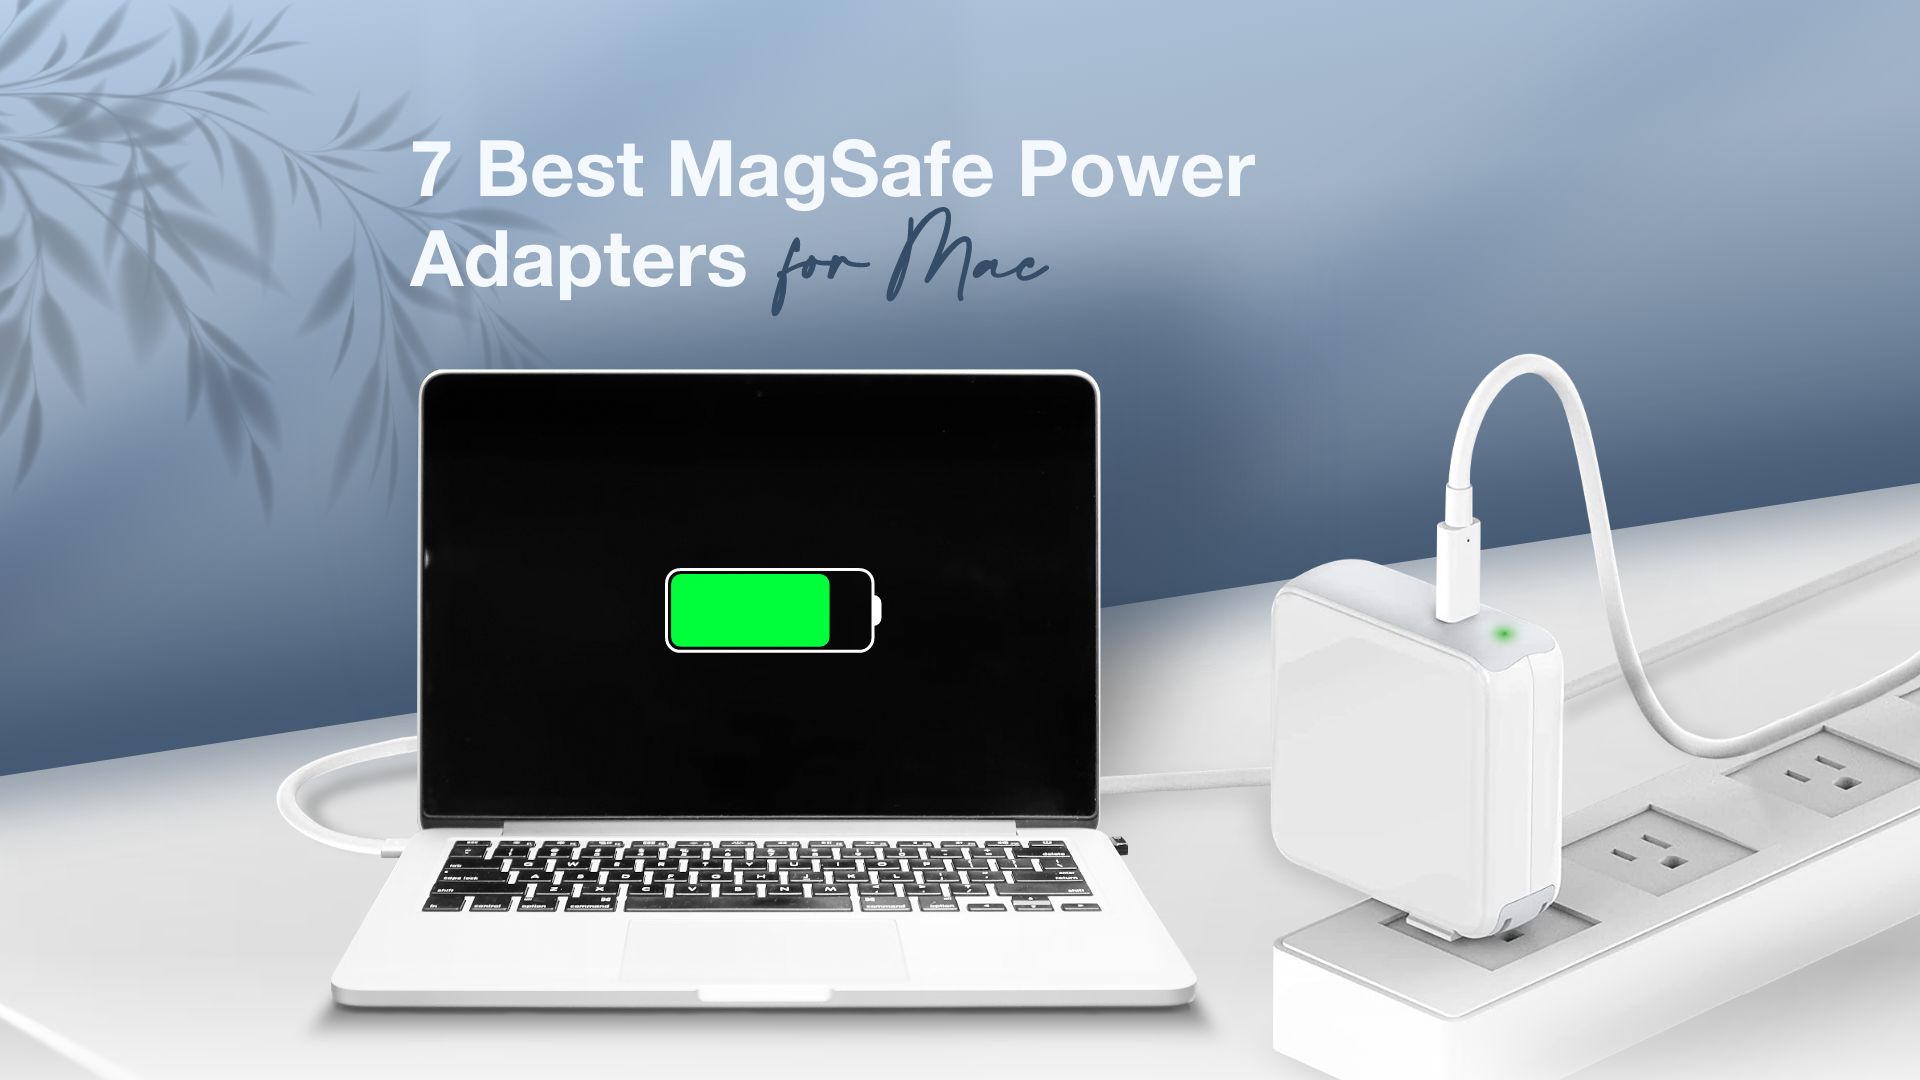 7 Best MagSafe Power Adapters in 2022